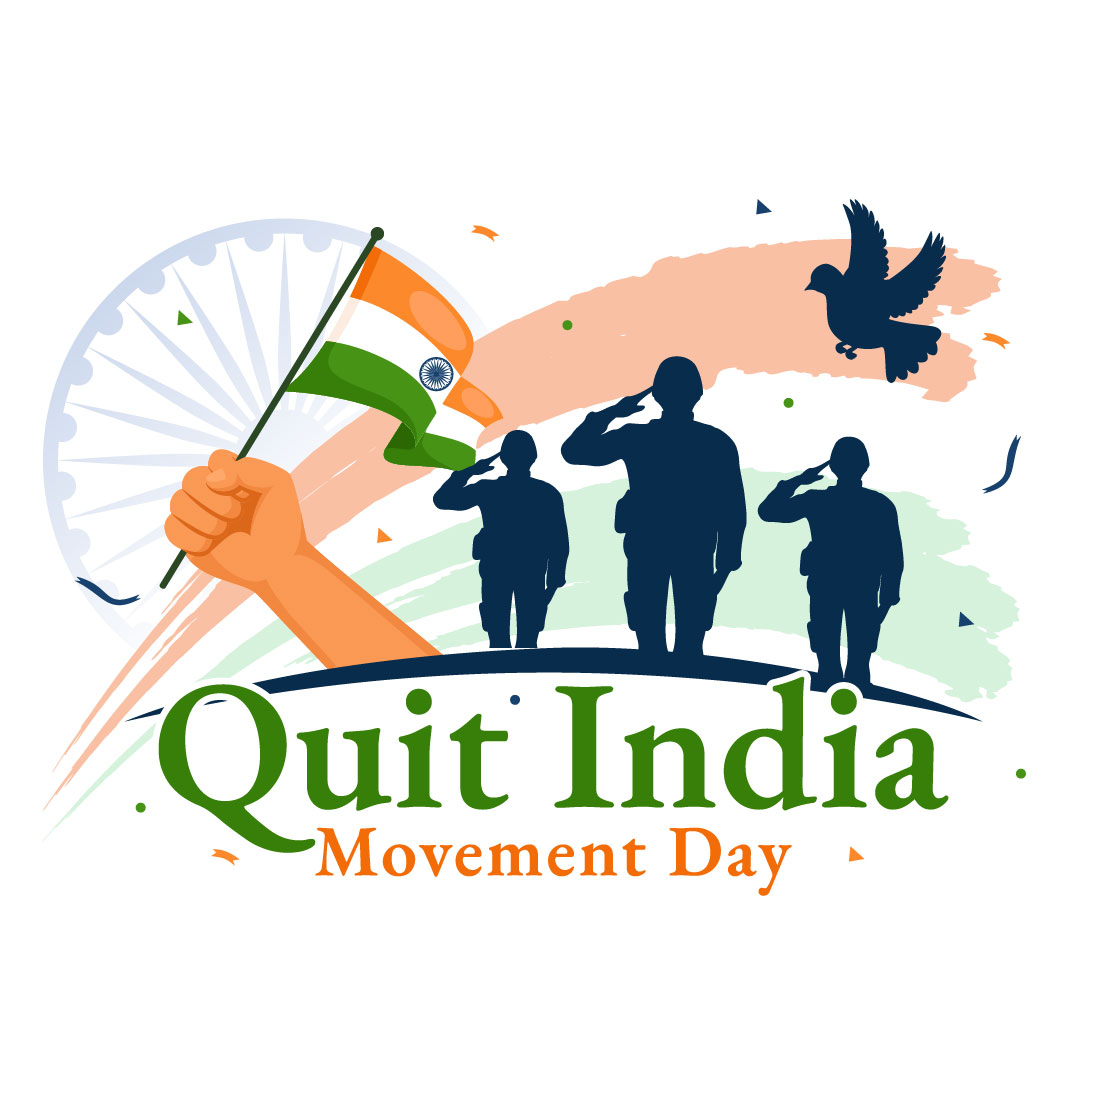 9 Quit India Movement Day Illustration preview image.